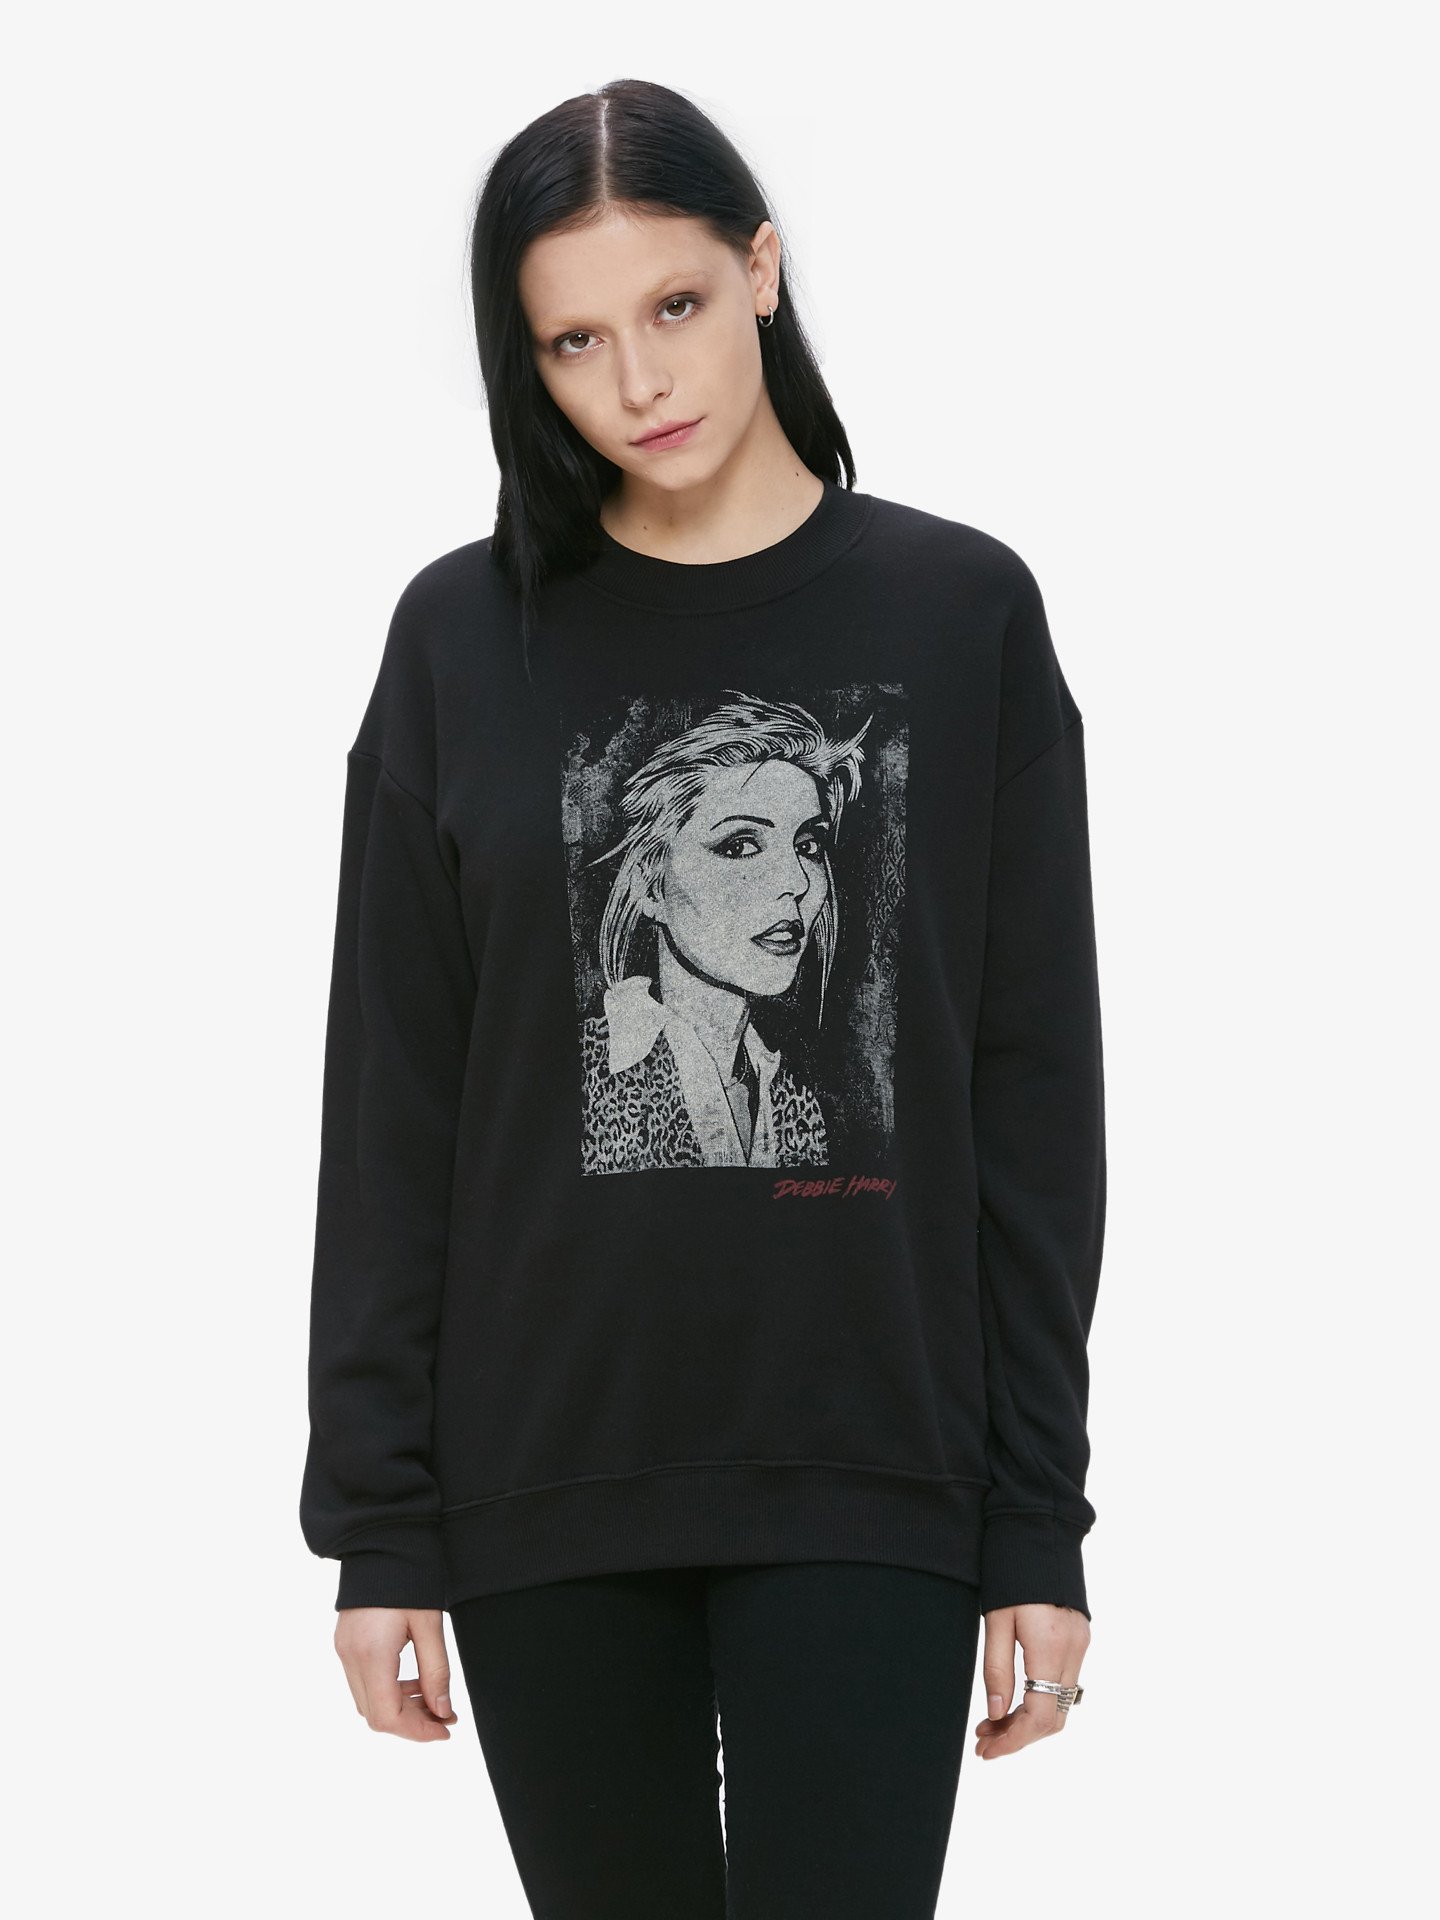 A new clothing collection from Obey and punk icon Debbie Harry is here ...